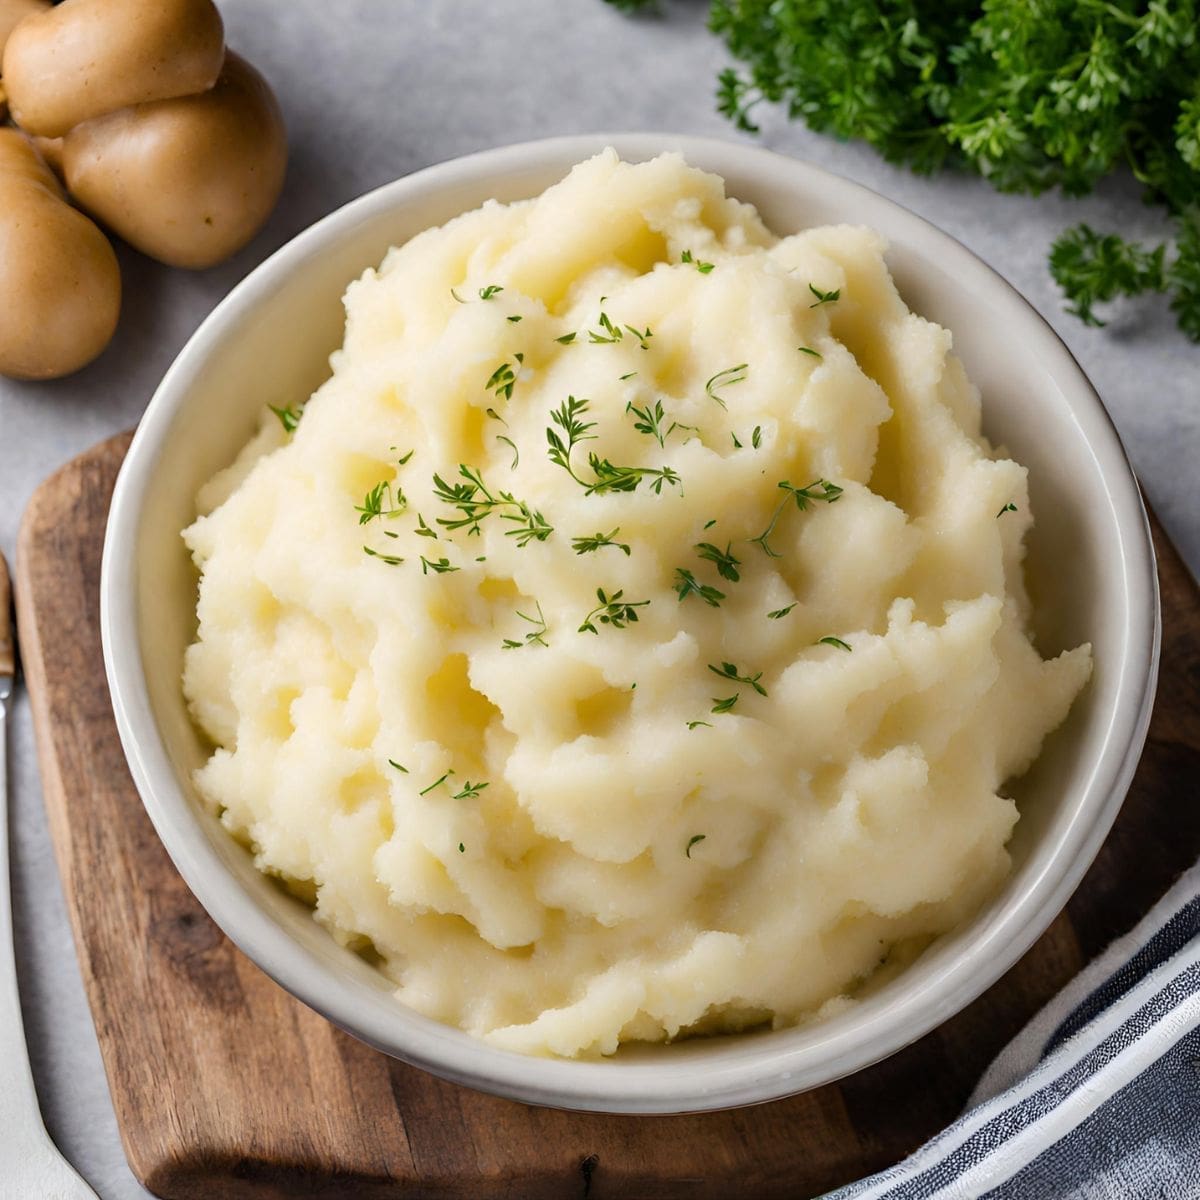 Mashed Potato Mistakes You Didn’t Know You Were Making (and How to Fix Them!